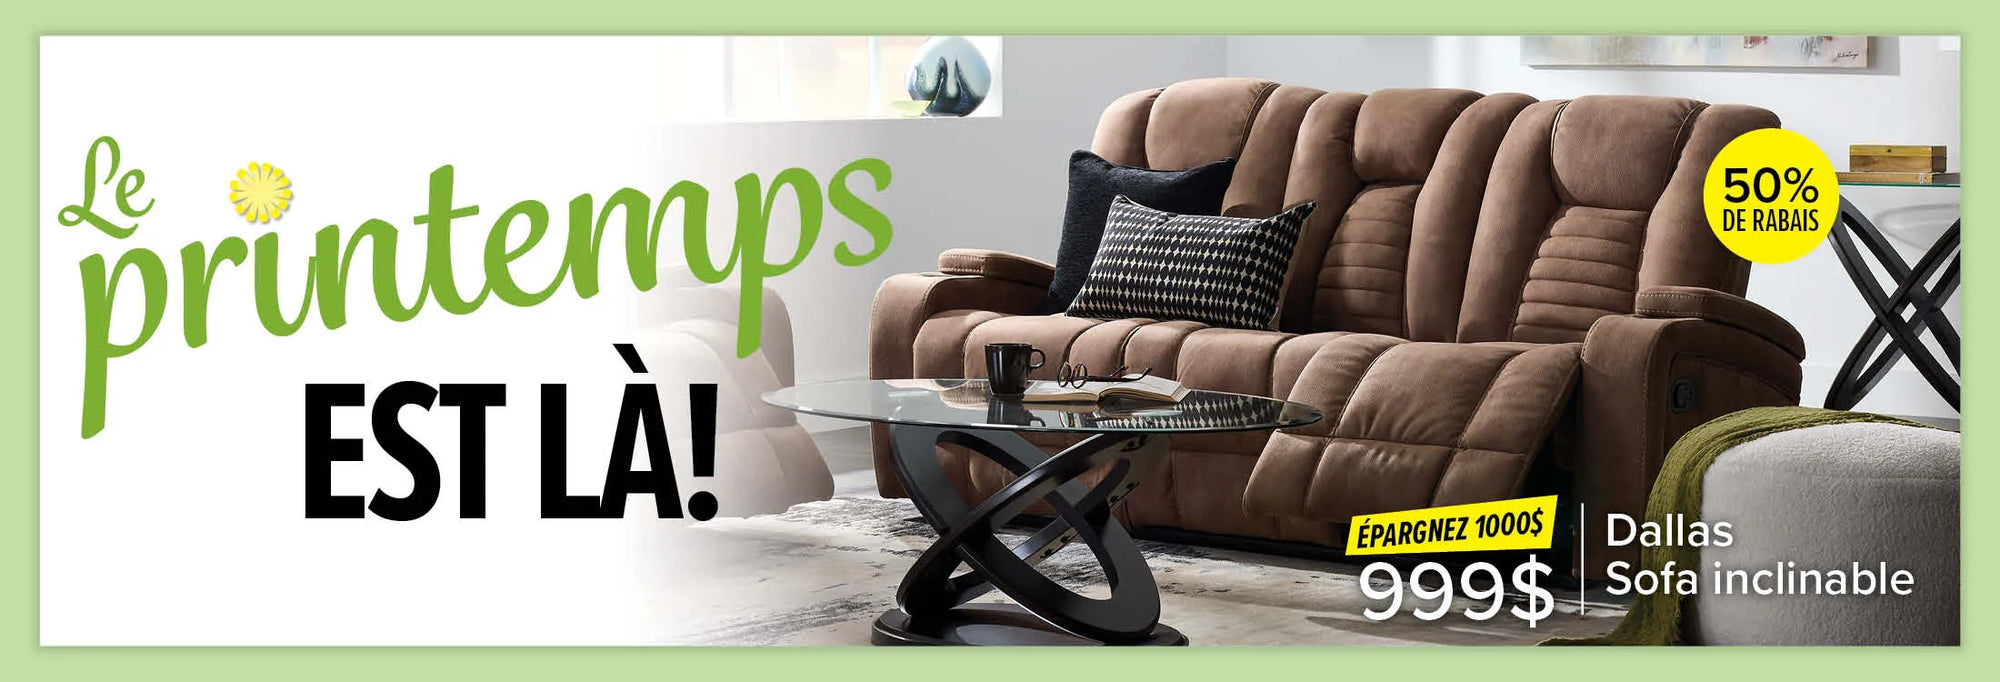 Spring it on! Save $1000 on Dallas Reclining Sofa now $999 50% off.